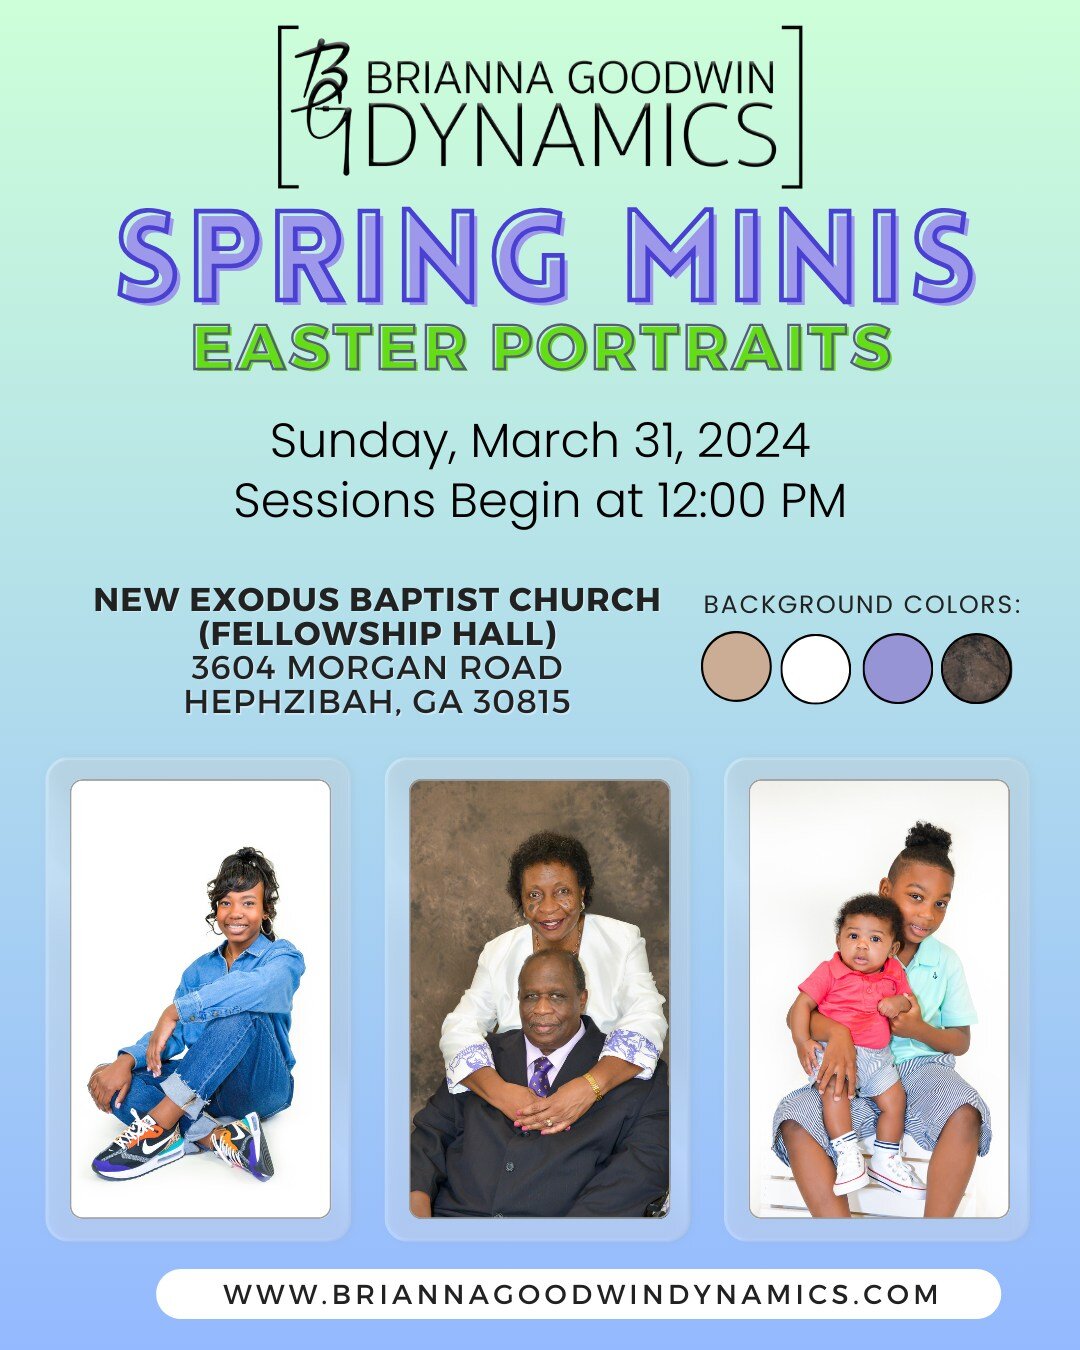 Today, is the final day to book Easter Portraits at New Exodus Baptist Church on tomorrow, March 31, 2024! 🌸🌷

We are so excited to capture everyone in their Easter Sunday best! Walk-ins will be available after all booked sessions are complete. BOO